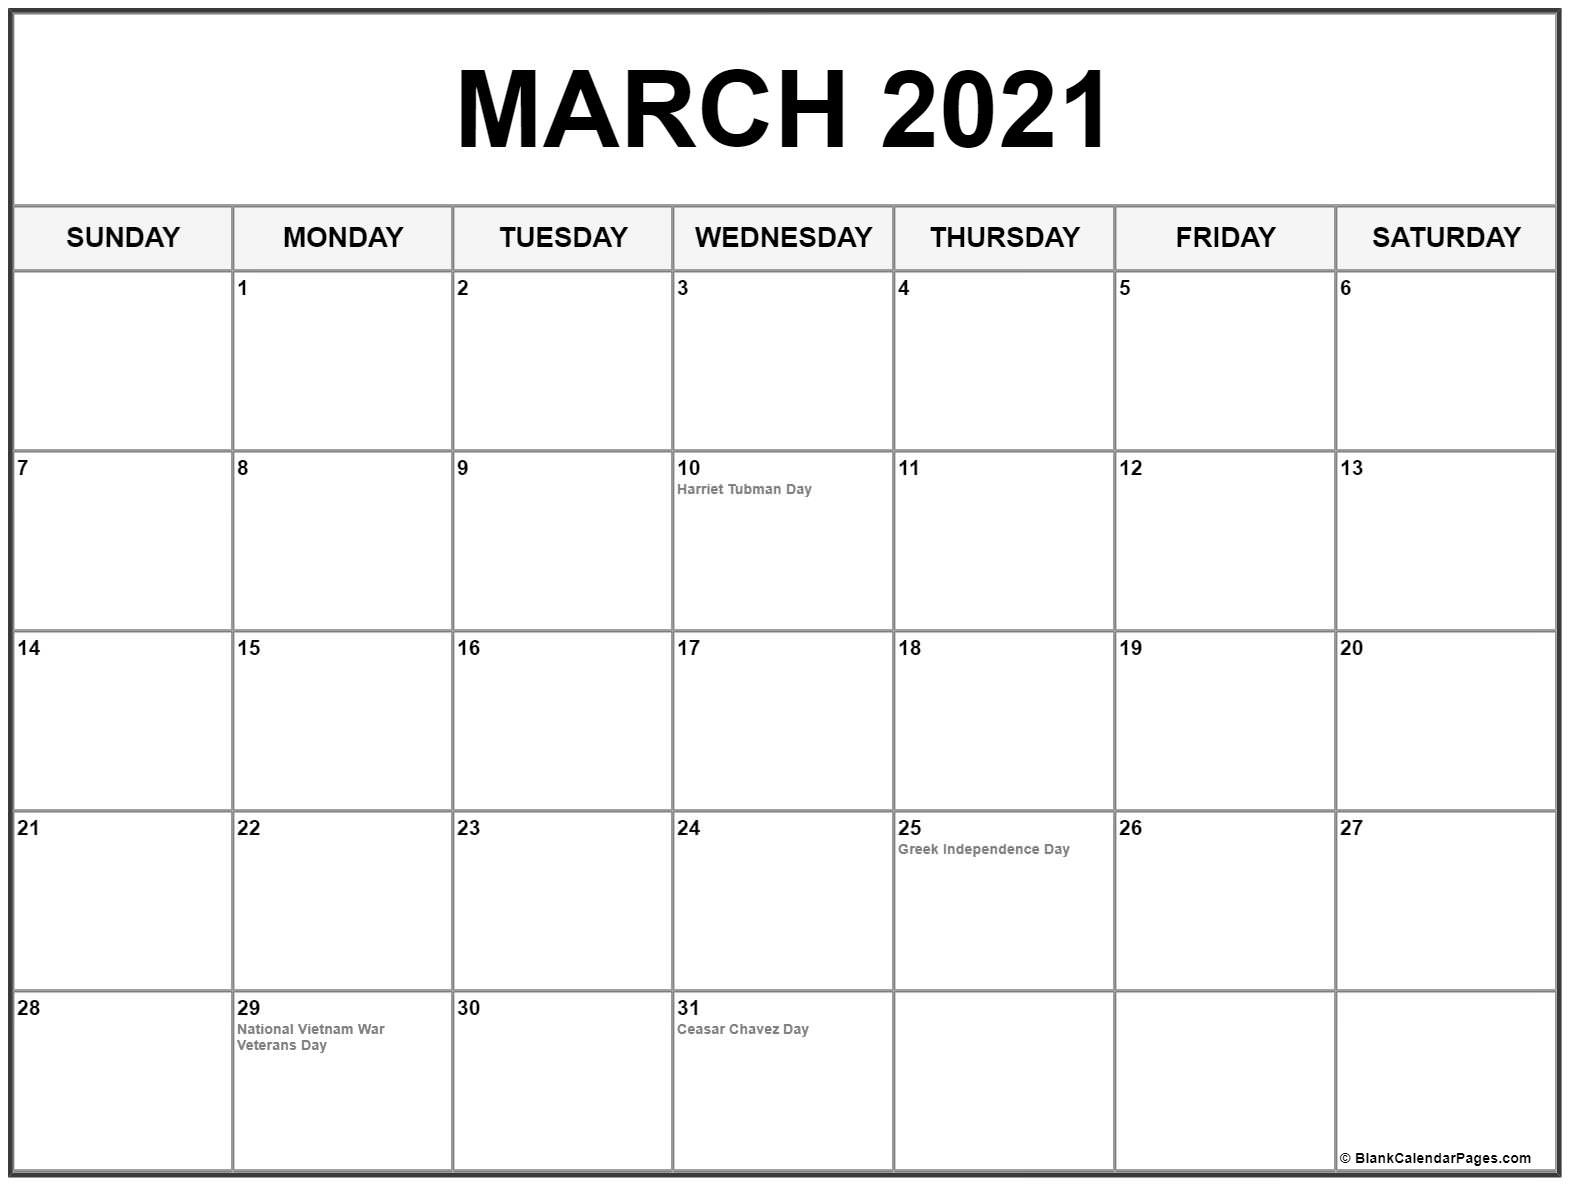 March 2021 Calendar With Holidays-Holiday Schedule Usa 2021